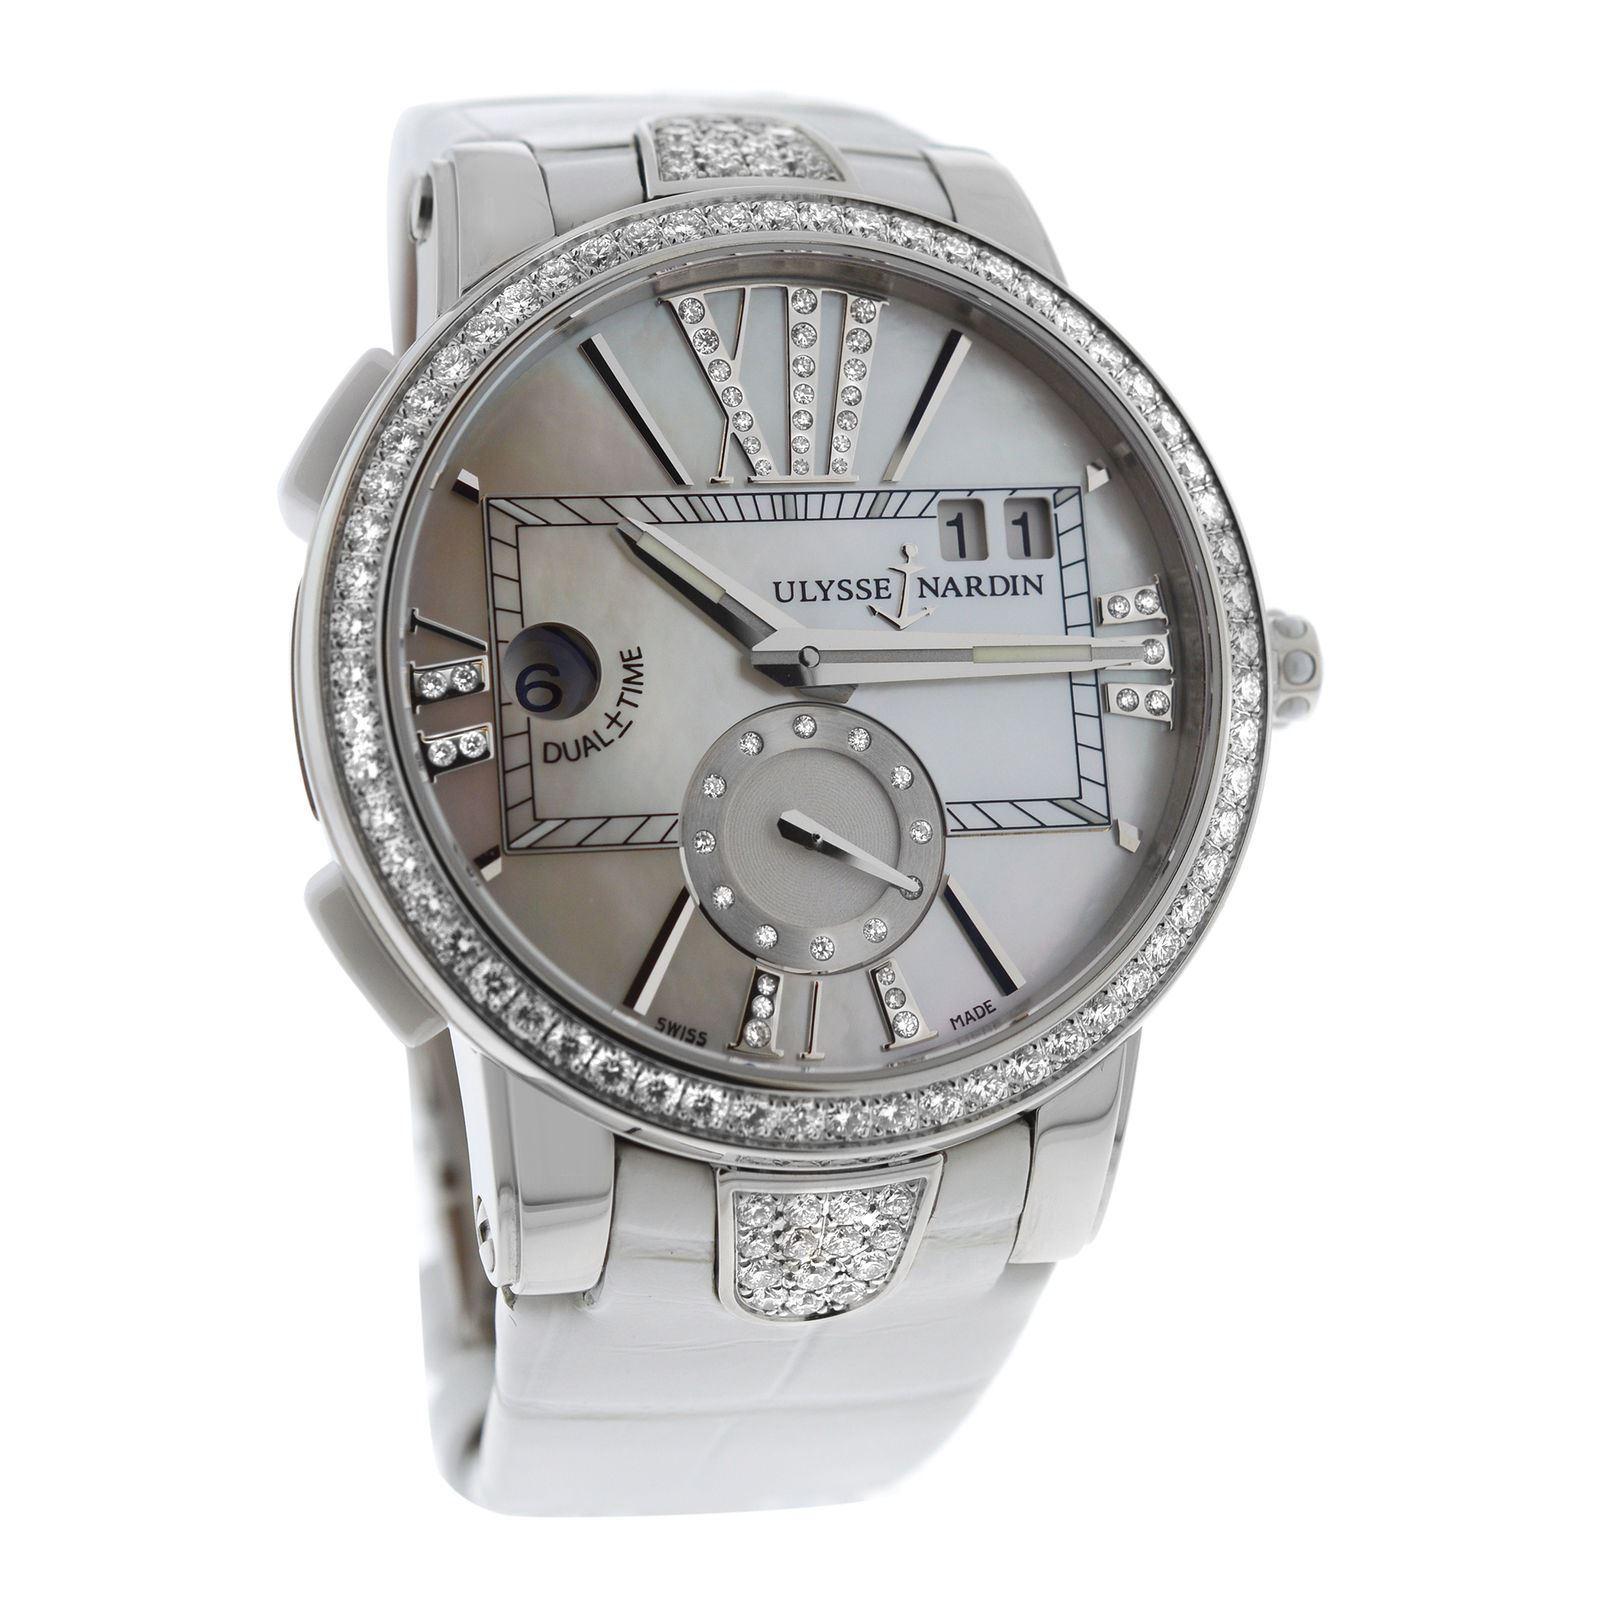 Brand	Ulysse Nardin
Model	Executive Dual Time 243-10B-3C/391
Gender	Ladies
Condition	New store display
Movement	Swiss Automatic
Case Material	Stainless Steel
Bracelet / Strap Material	
Genuine Leather

Clasp / Buckle Material	
Titanium	
Clasp